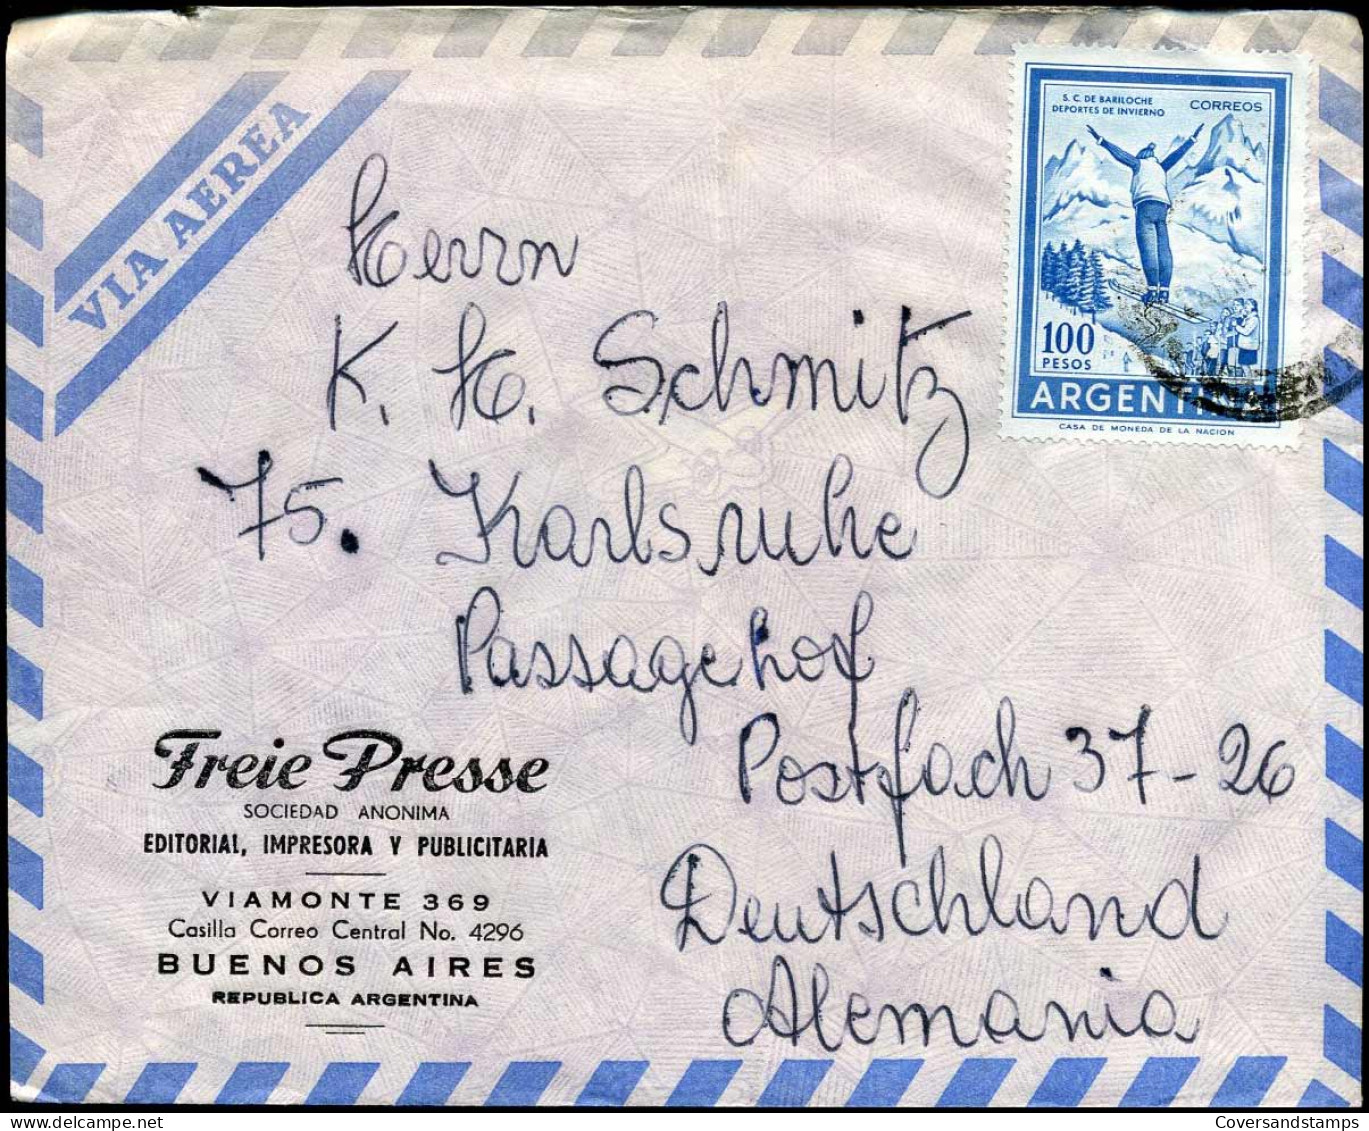 Airmail Cover To Karlsruhe, Germany - 'Freie Presse, Editiorial, Impresora Y Publicitaria, Buenos Aires' - Luftpost